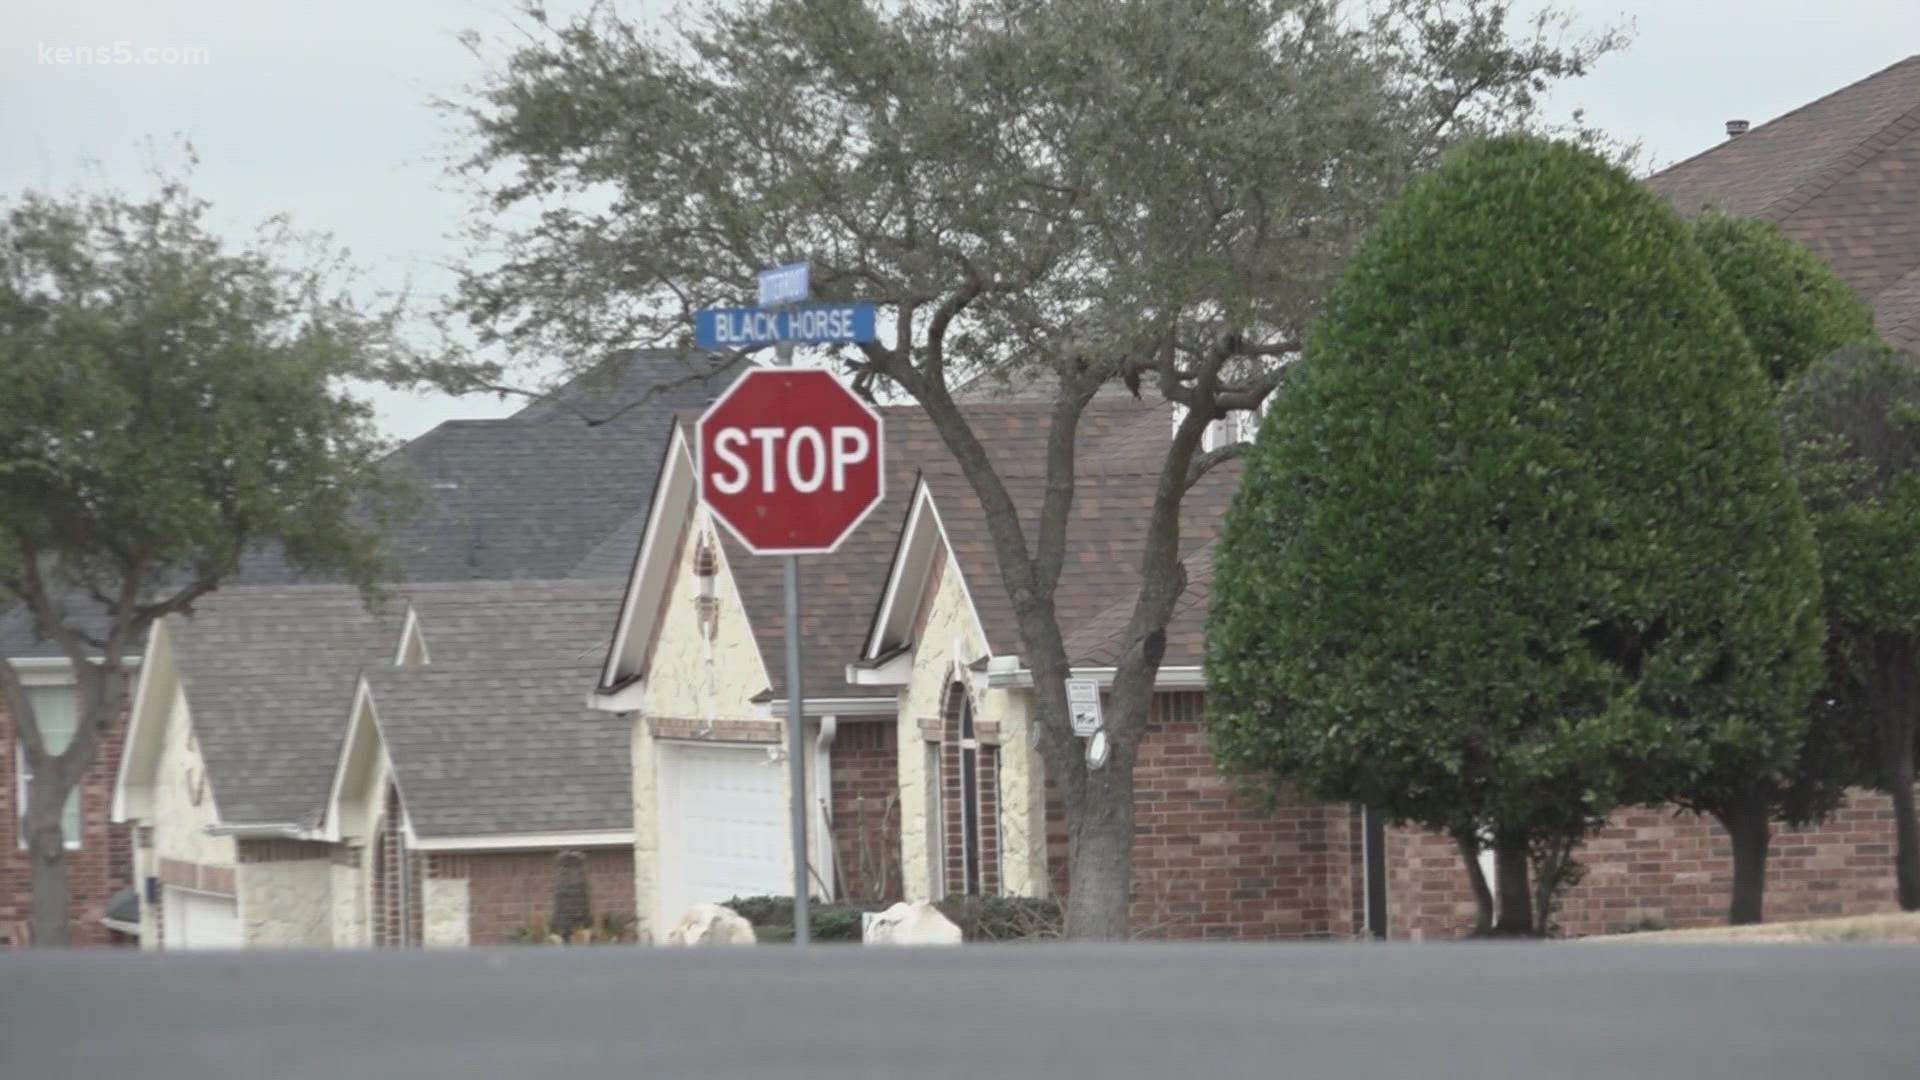 One neighbor told KENS 5 he found over a dozen more packages filled with anti-semitic messages.